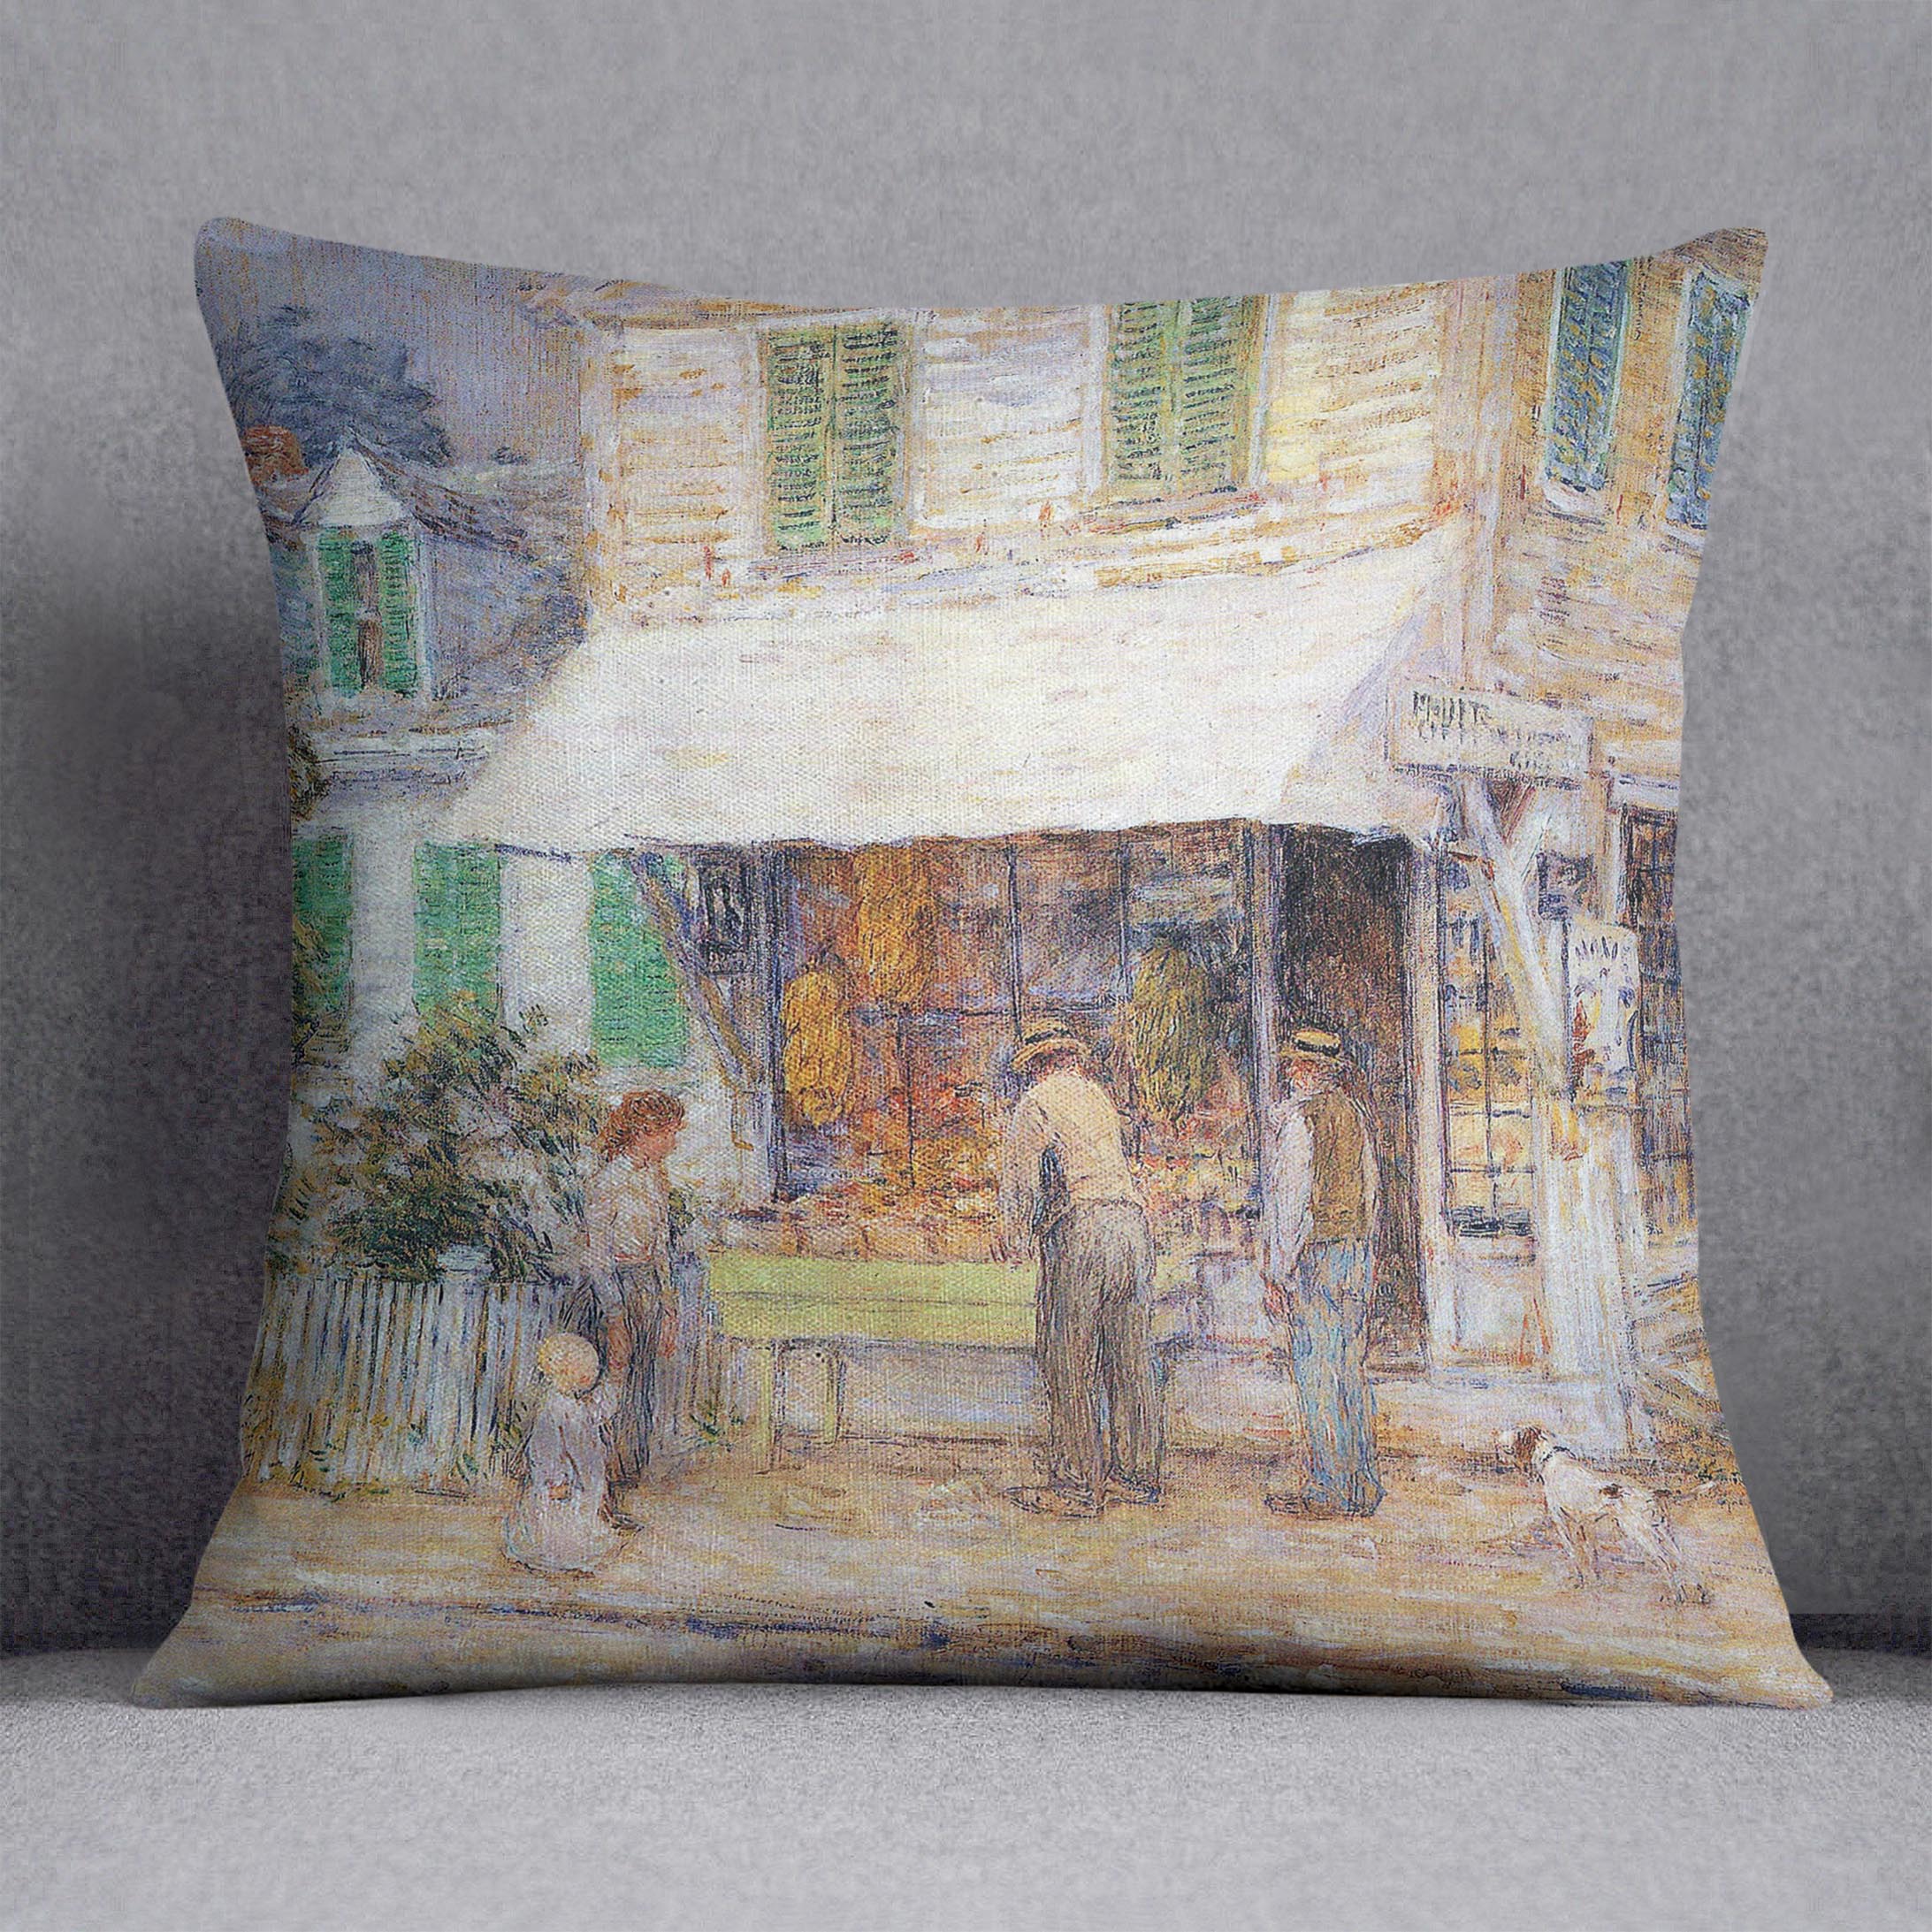 Provincial town by Hassam Cushion - Canvas Art Rocks - 1